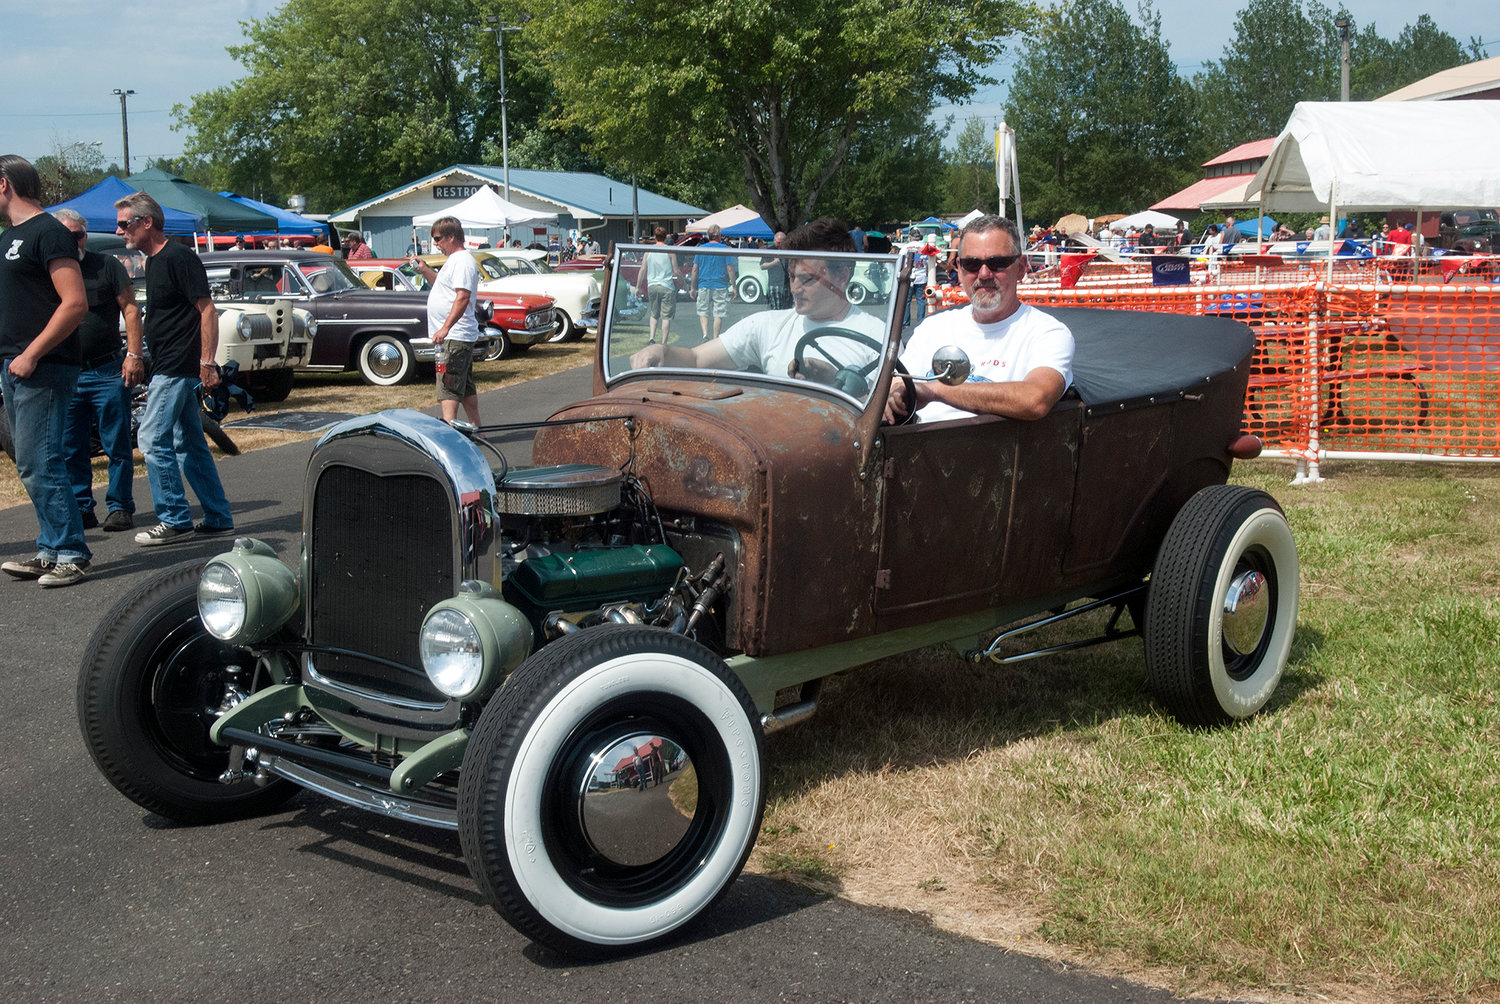 Aaron, left and Dennis Jaeger, cruise around the Billetproof NorthWest car show at the Southwest Washington Fairgrounds Saturday in a 1927 Ford Model T Touring hot rod.